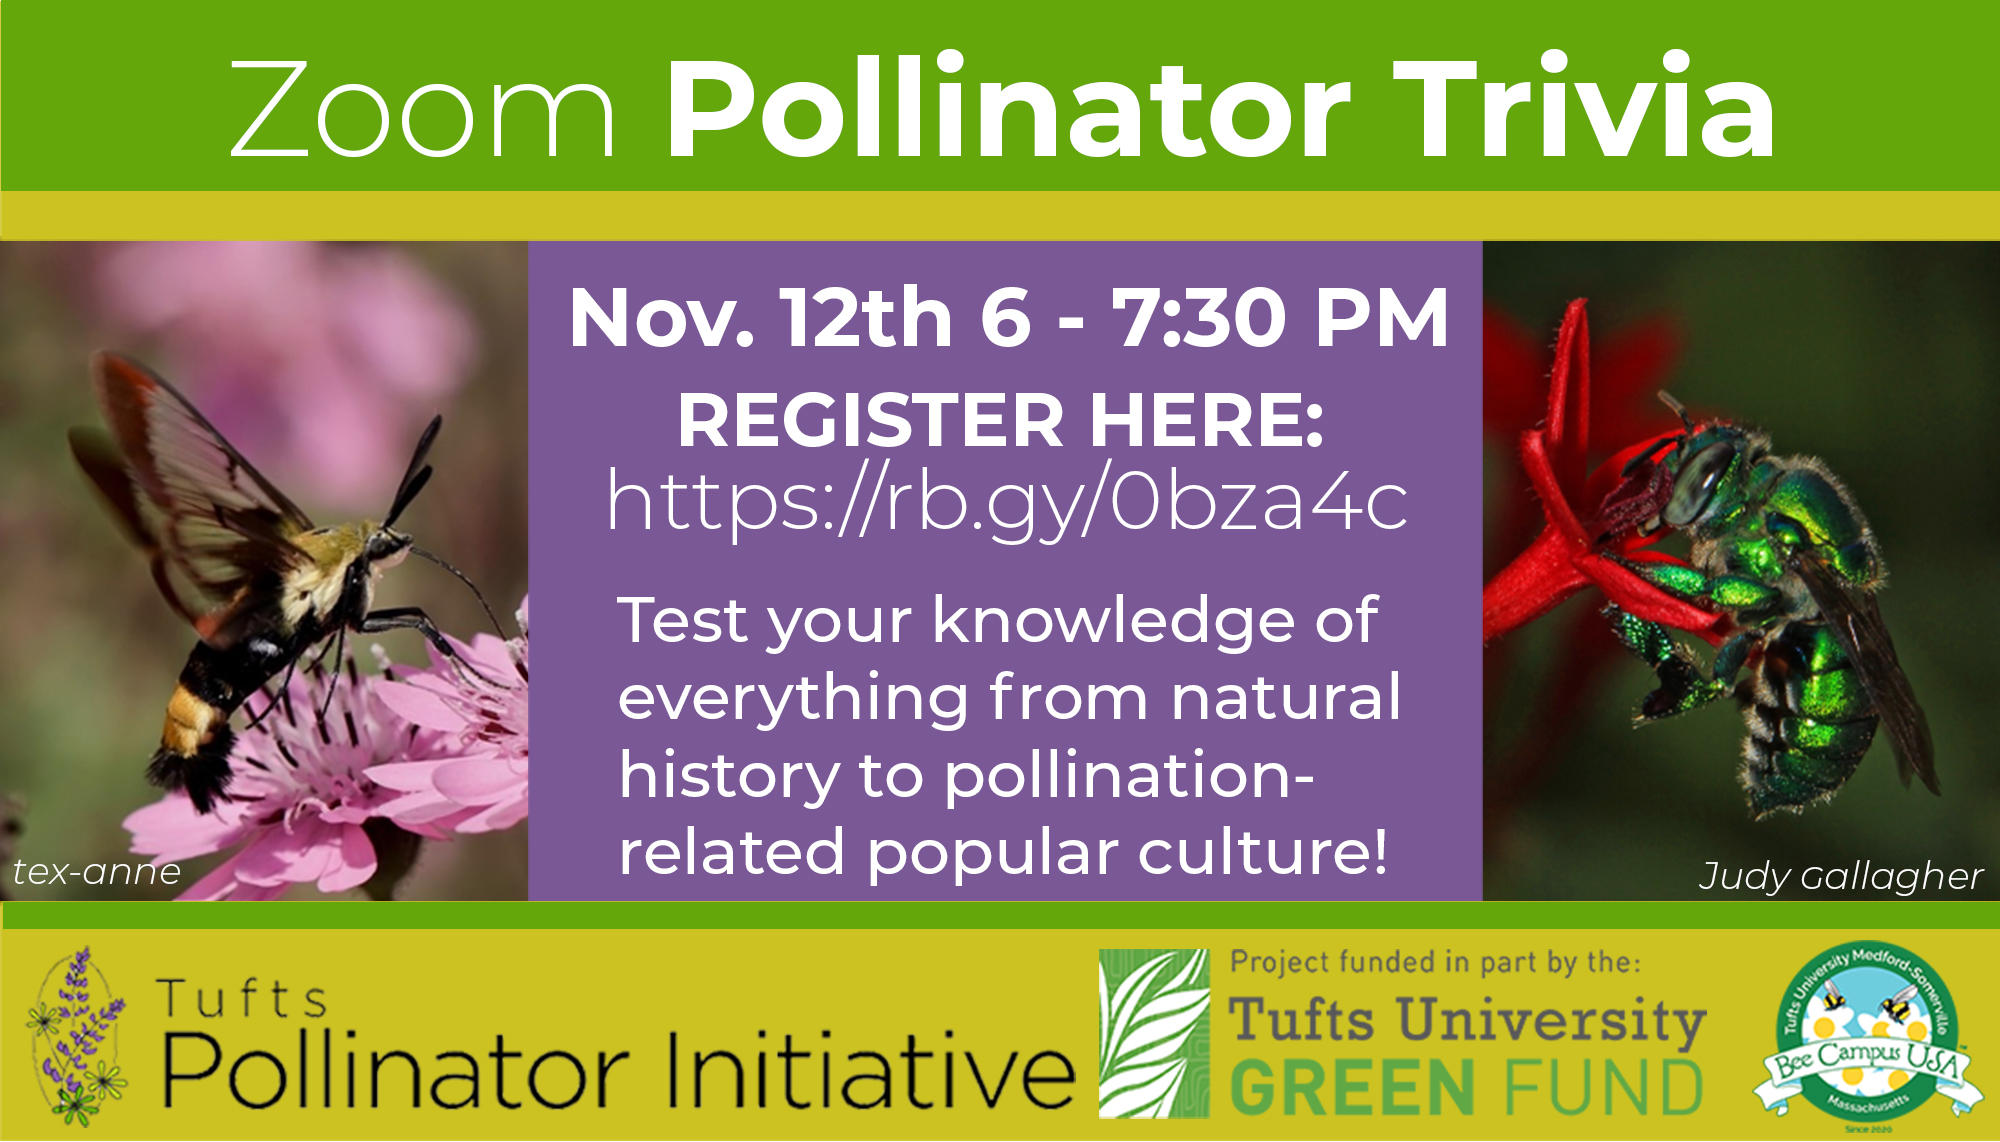 A promotional image for a pollinator trivia night. It has text describing the event, plus a photo of a yellow-and-black moth and a bright metallic green bee.